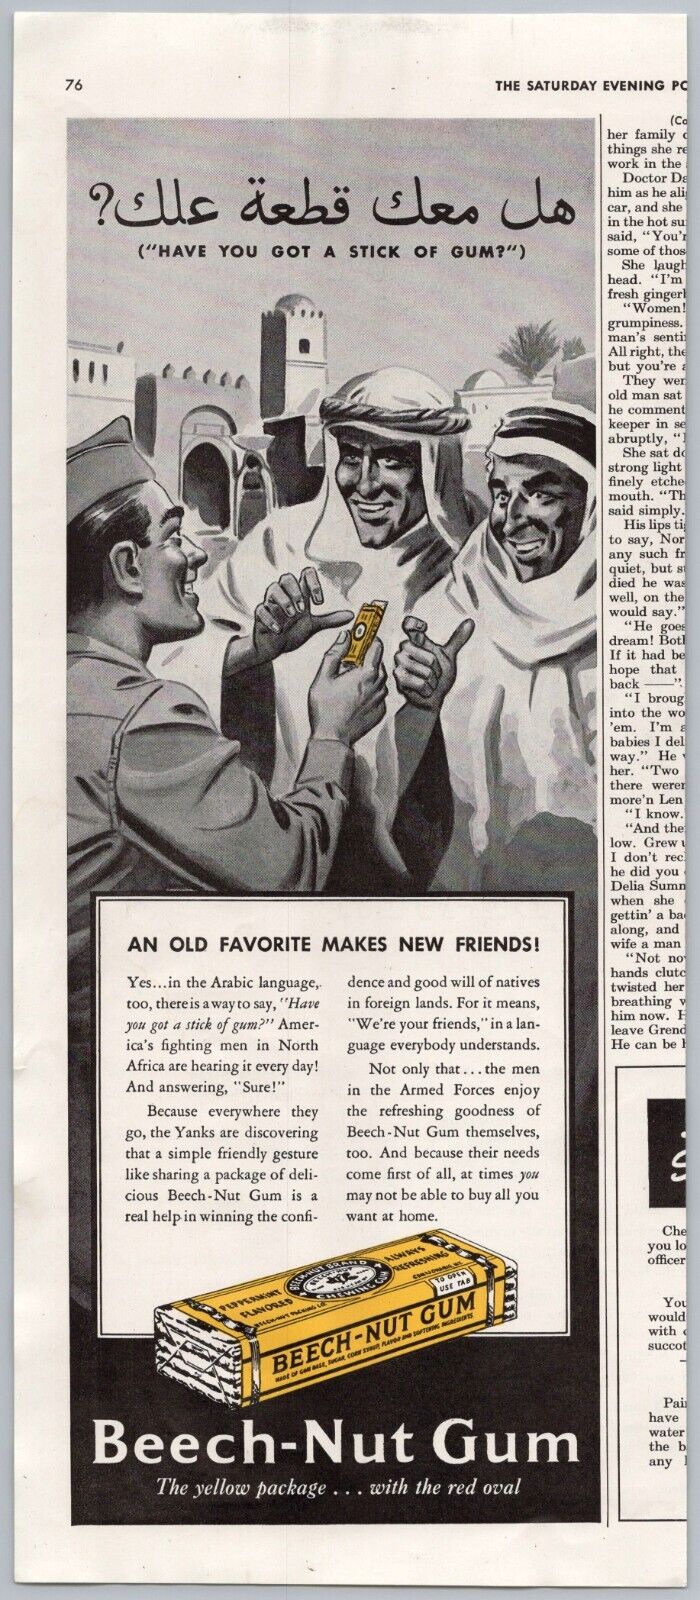 1943 Beech-Nut Gum An Old Favorite Makes New Friends VINTAGE PRINT AD SEP43